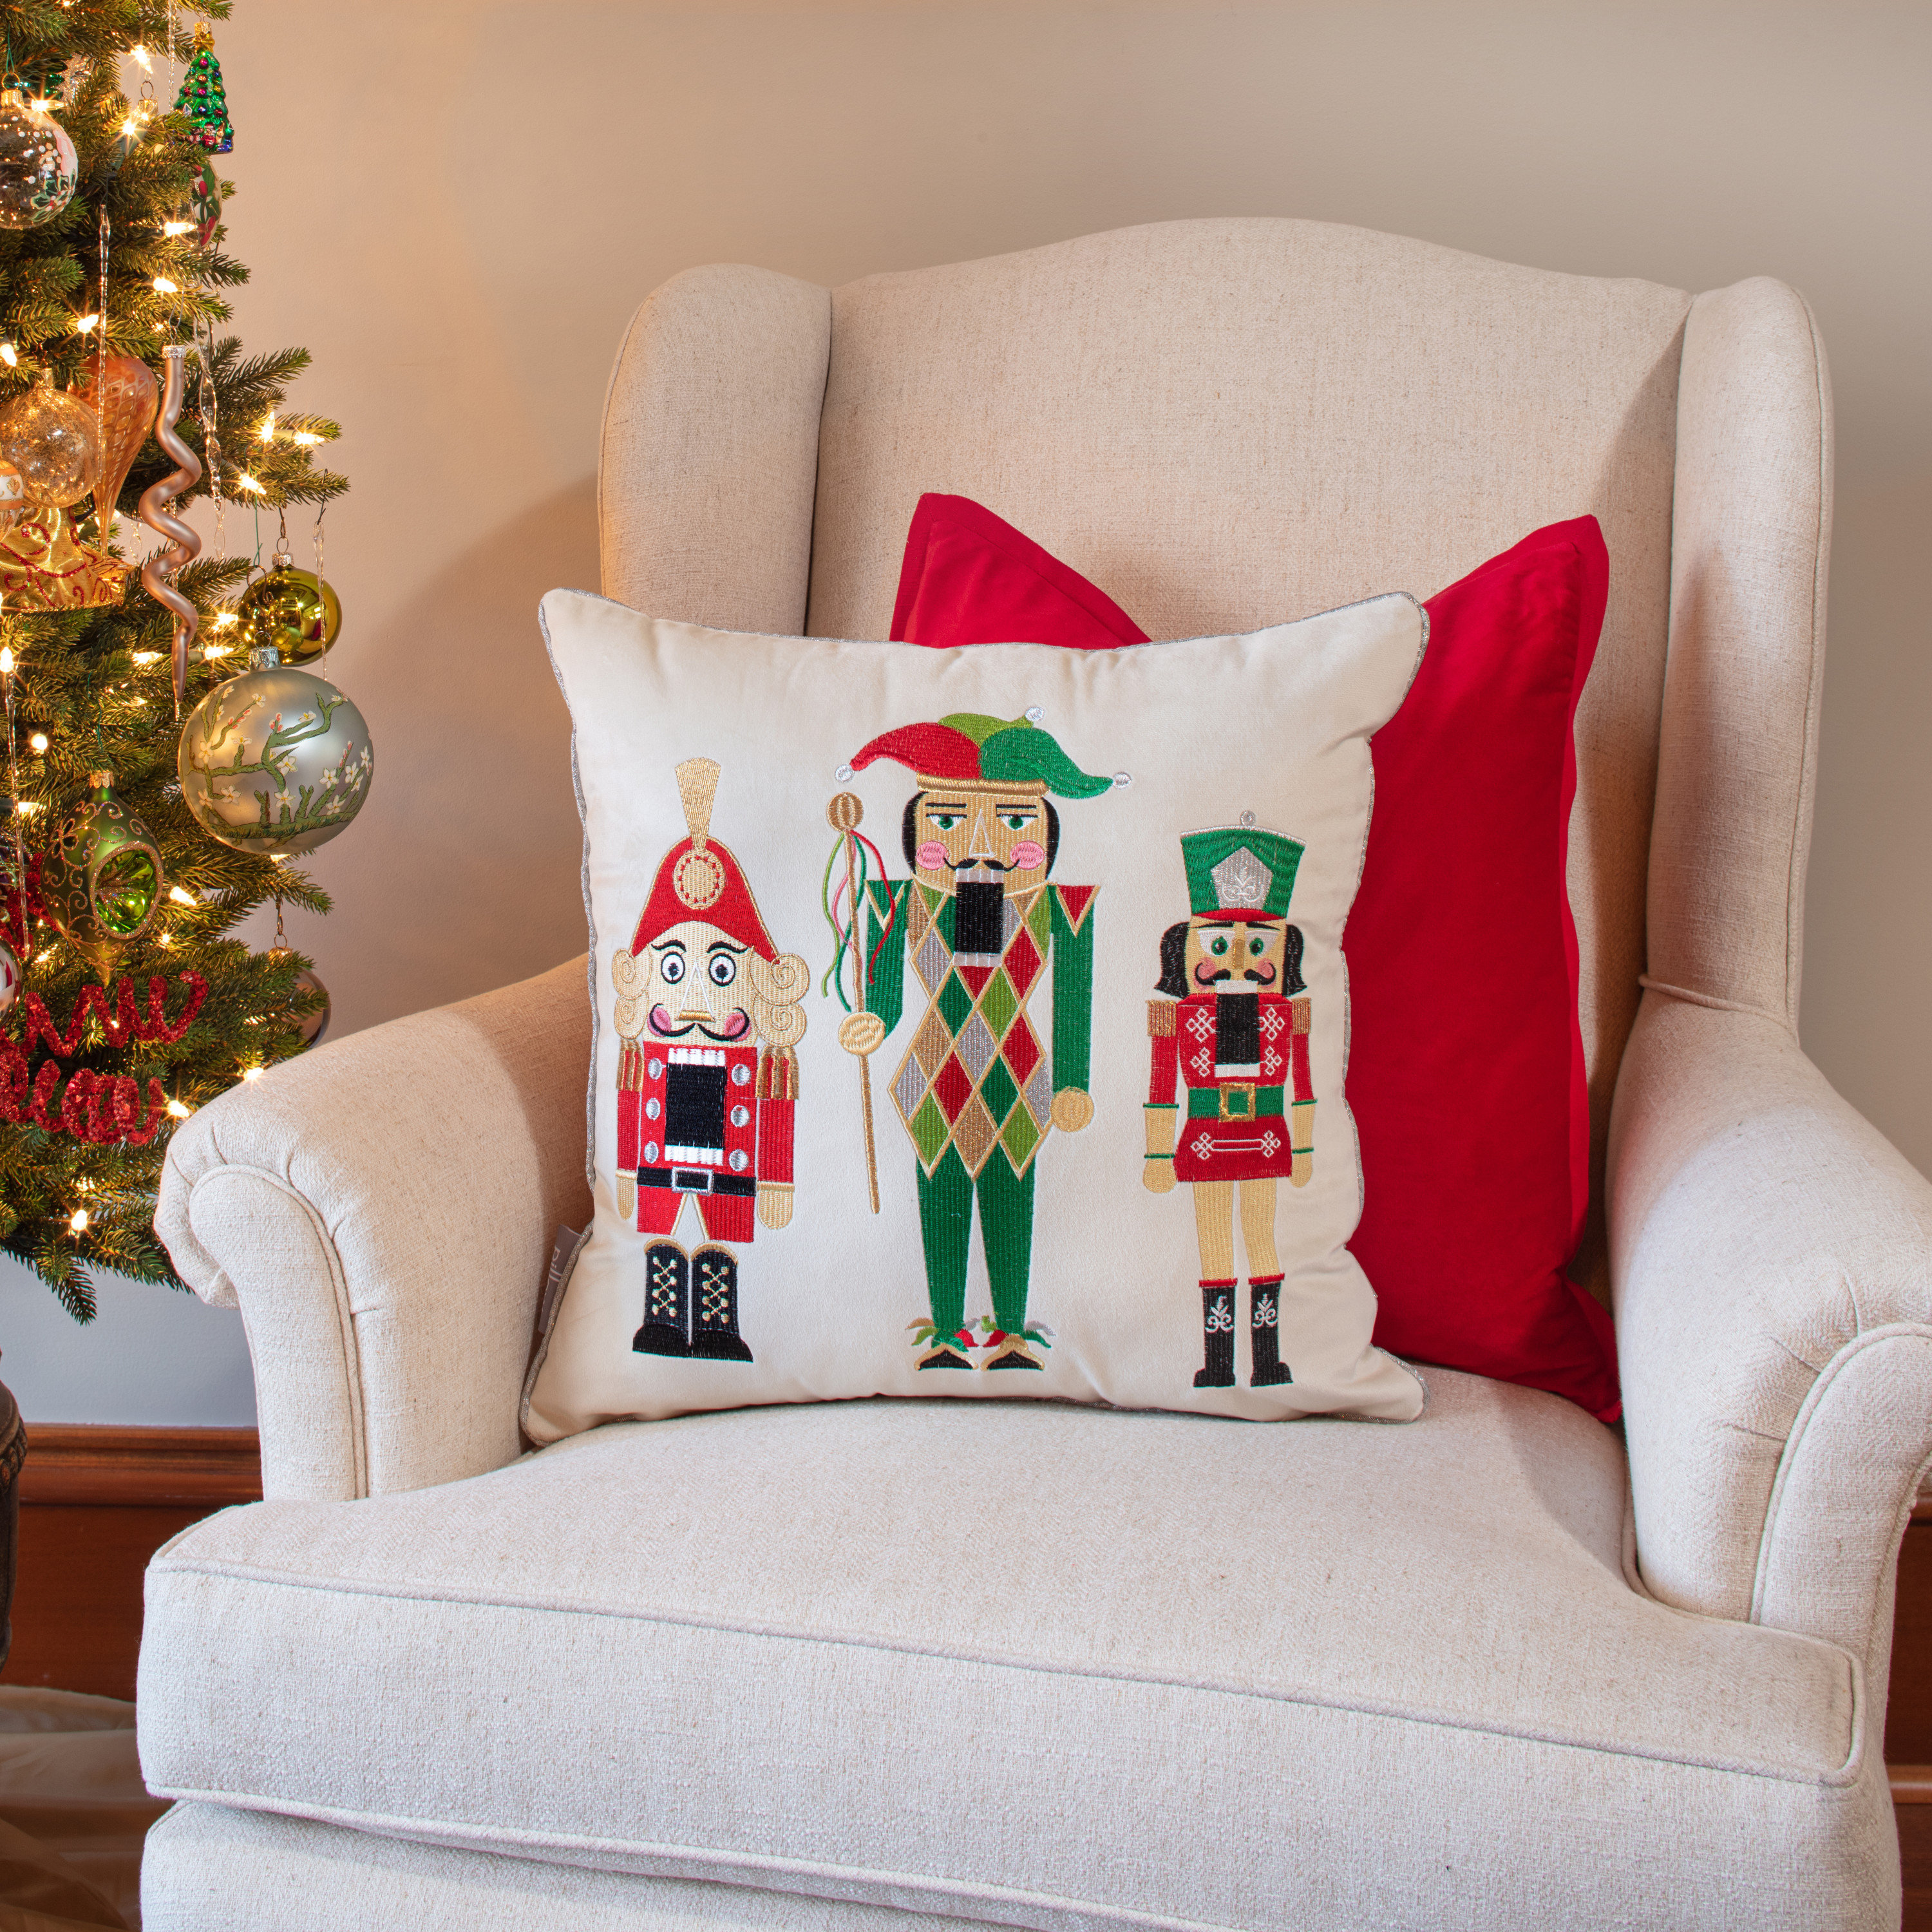 Holiday The Nutcracker Throw Pillow Cover & Insert Eastern Accents